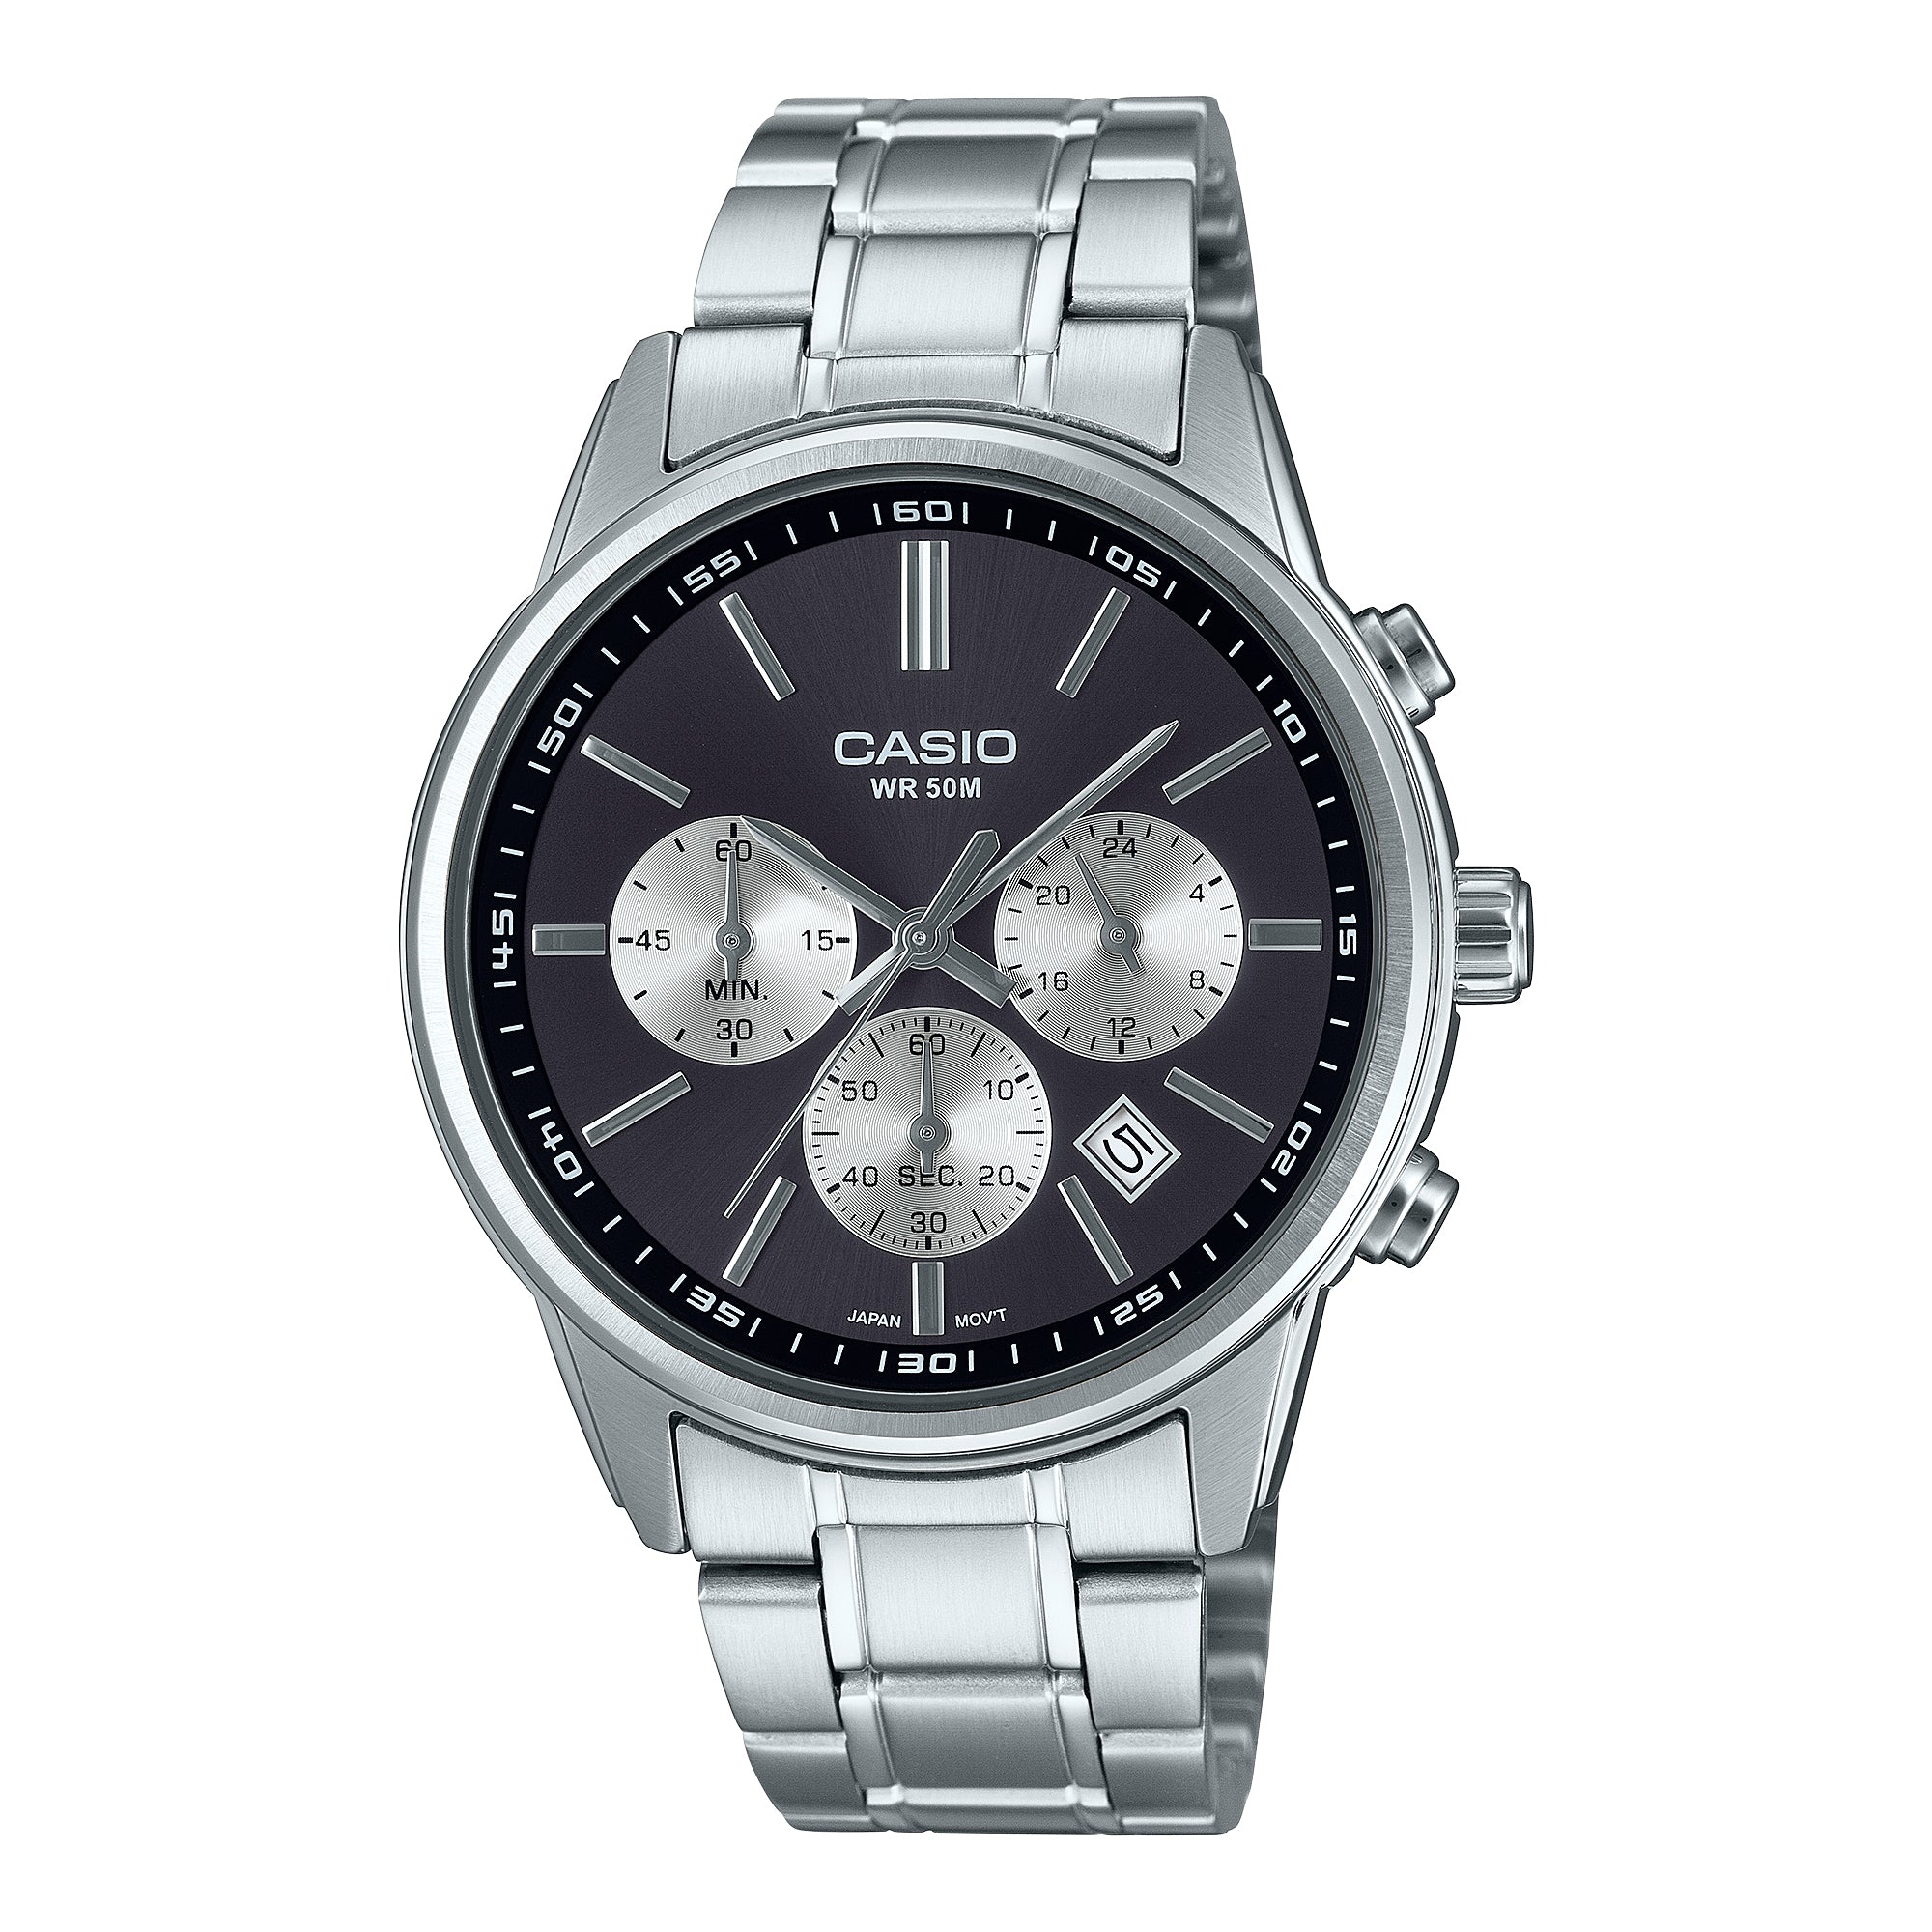 Casio Men's Analog Sporty Chronograph Stainless Steel Band Watch MTPE515D-1A MTP-E515D-1A